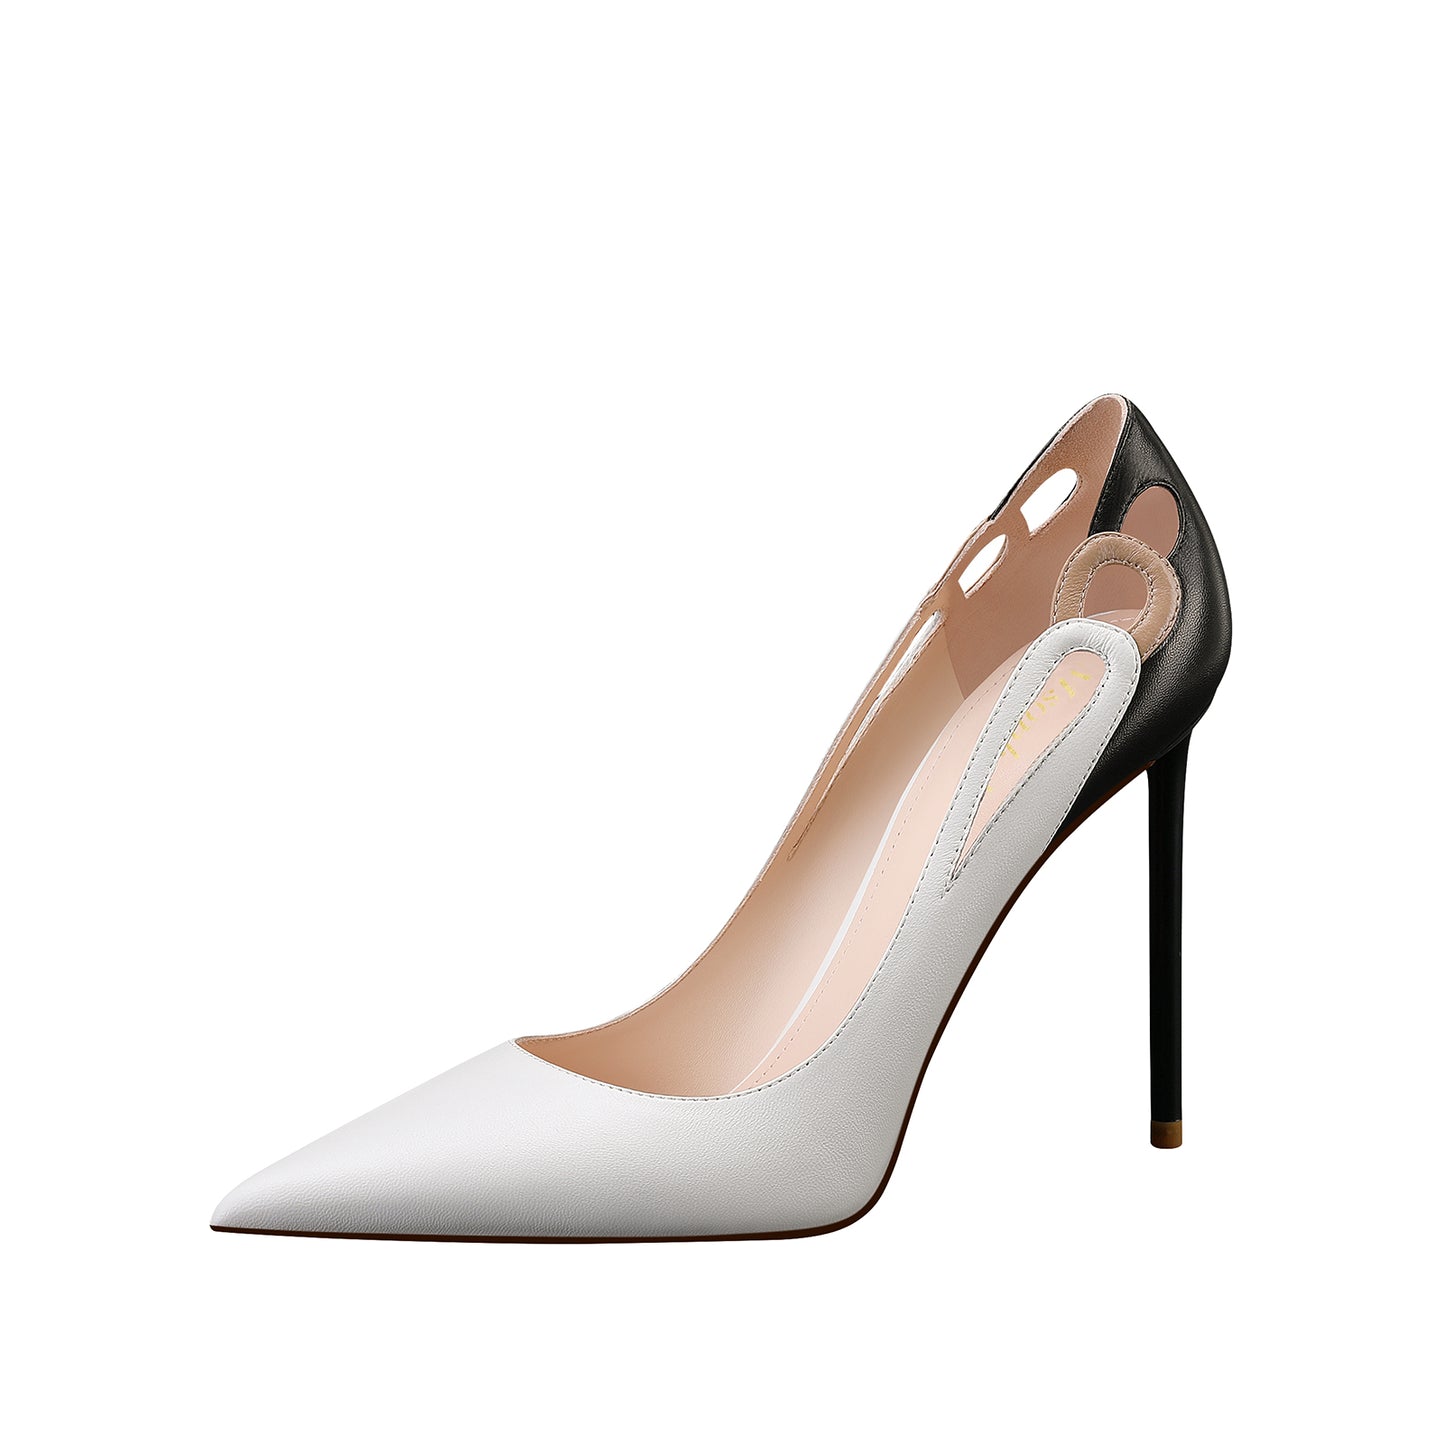 Sexy & Stylish Stiletto Pointed Toe High Heels Leather Pumps for Women